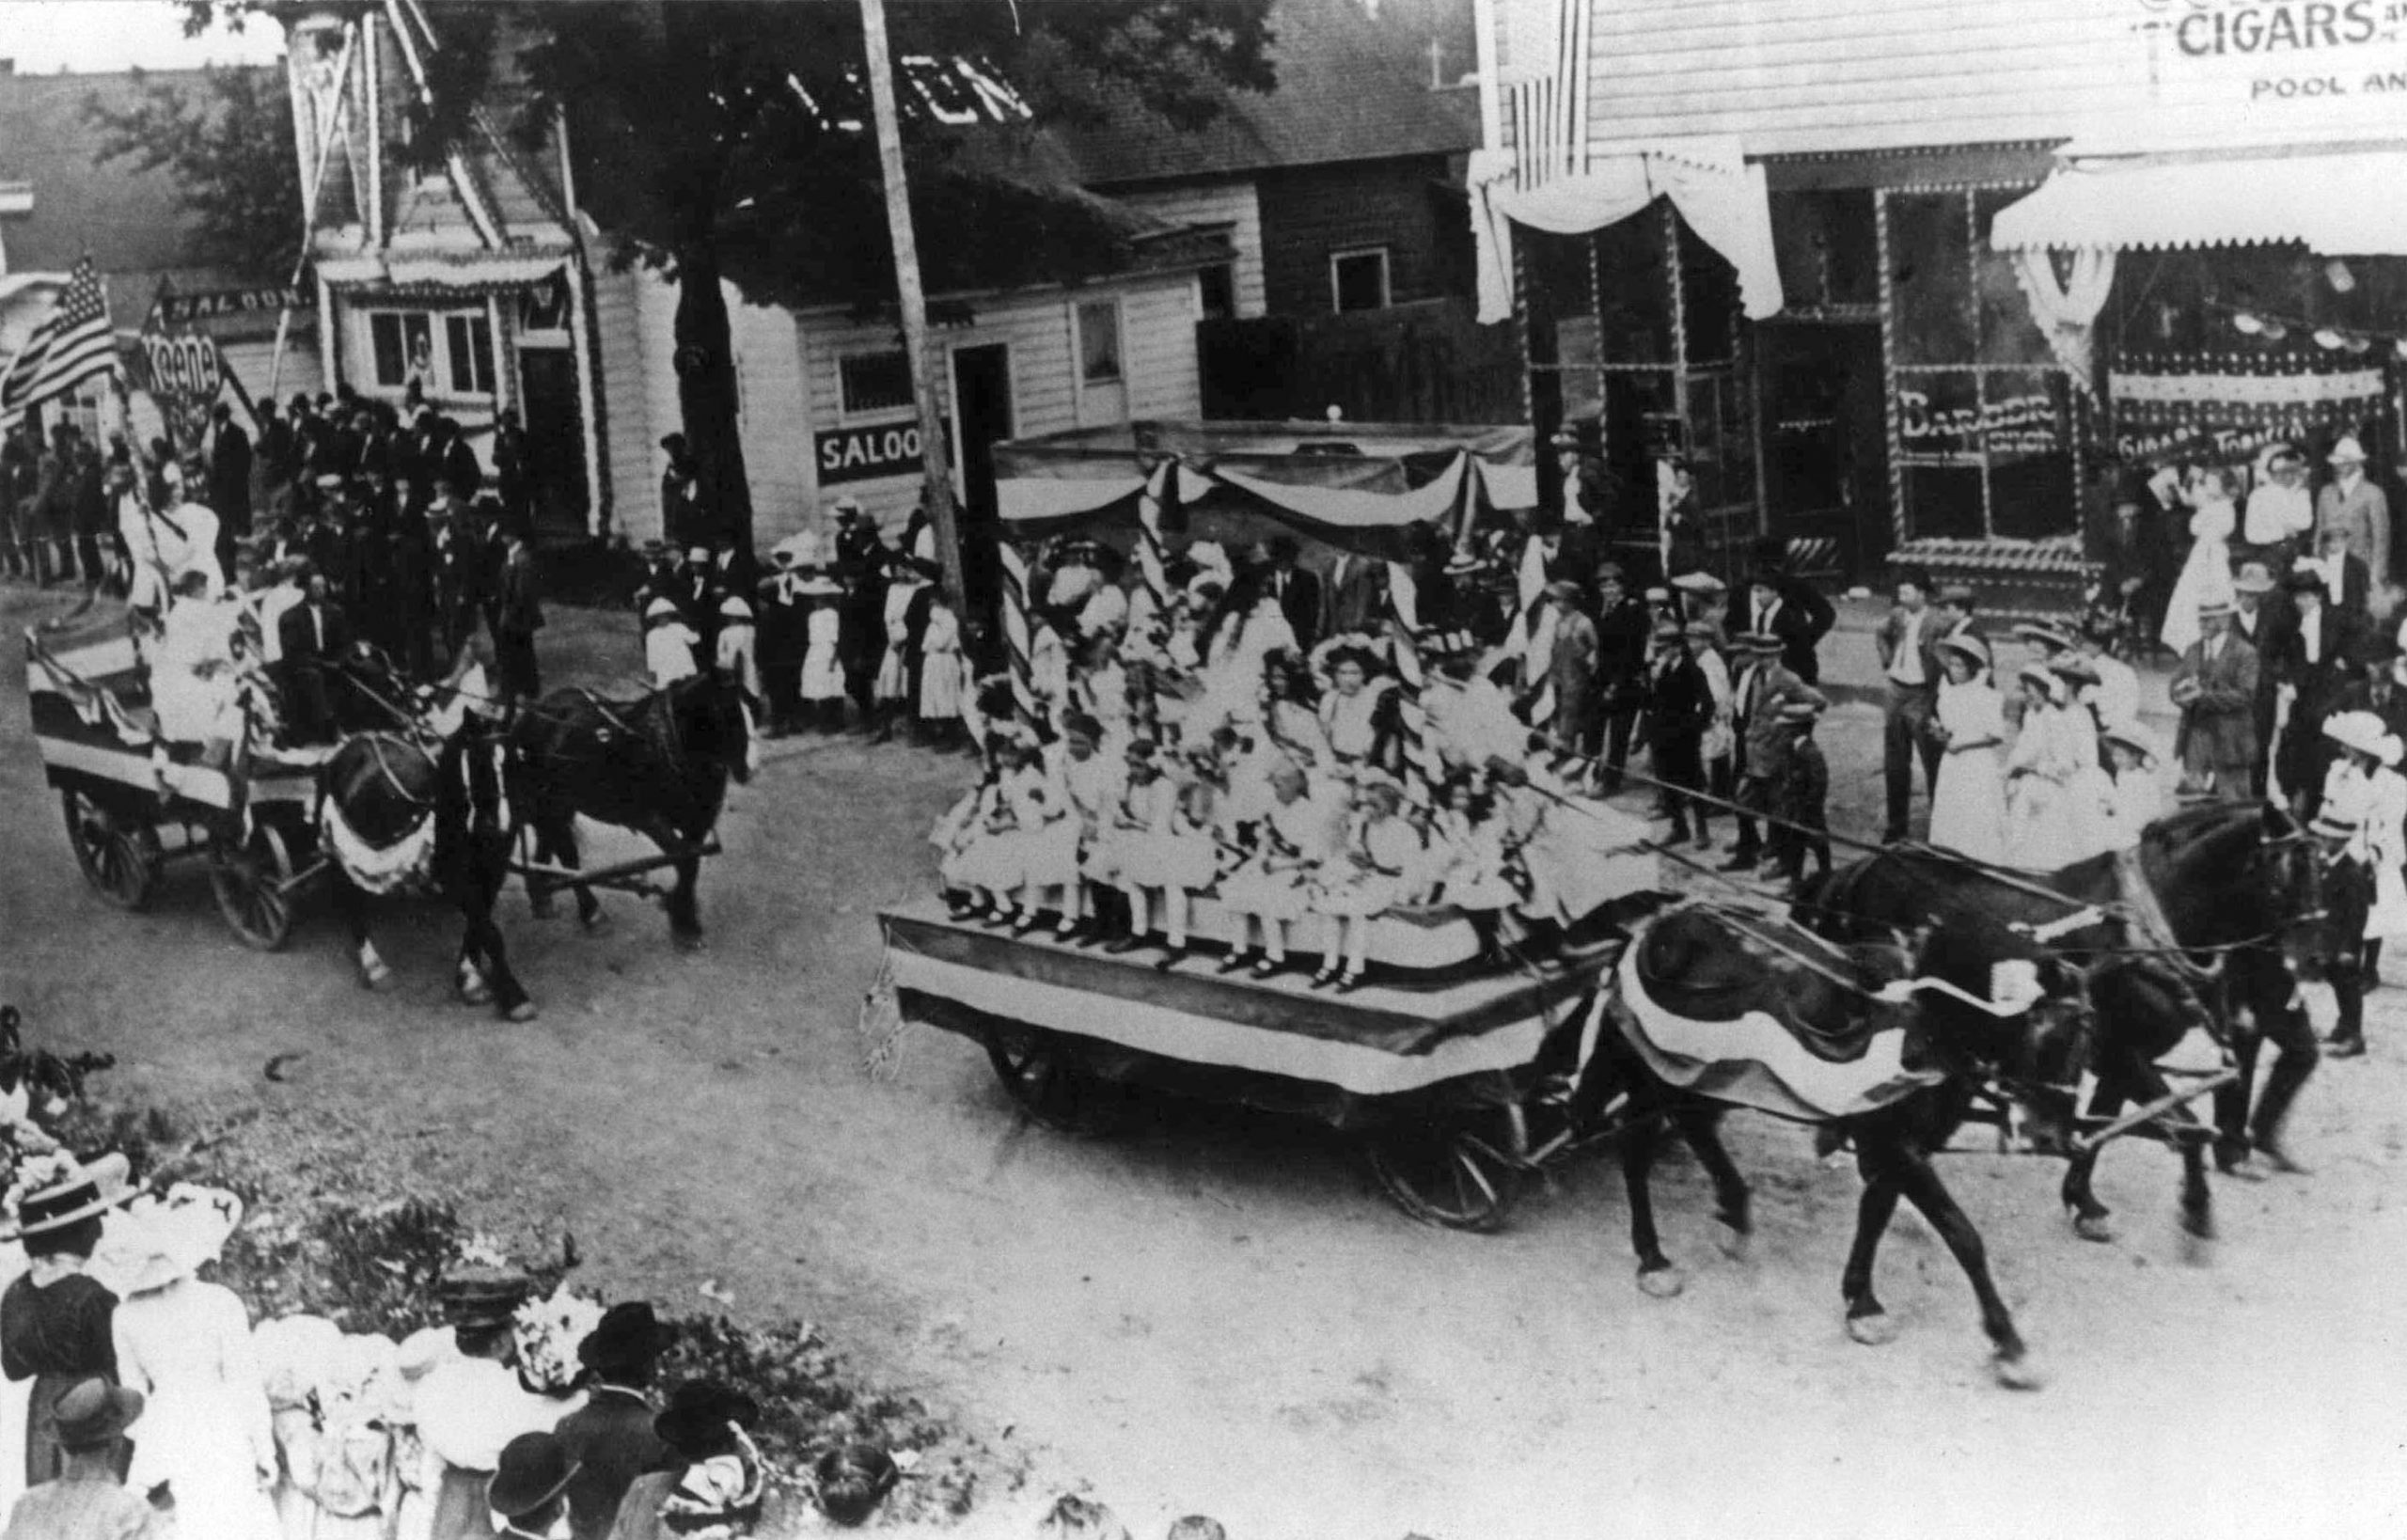 old parade float from 1912